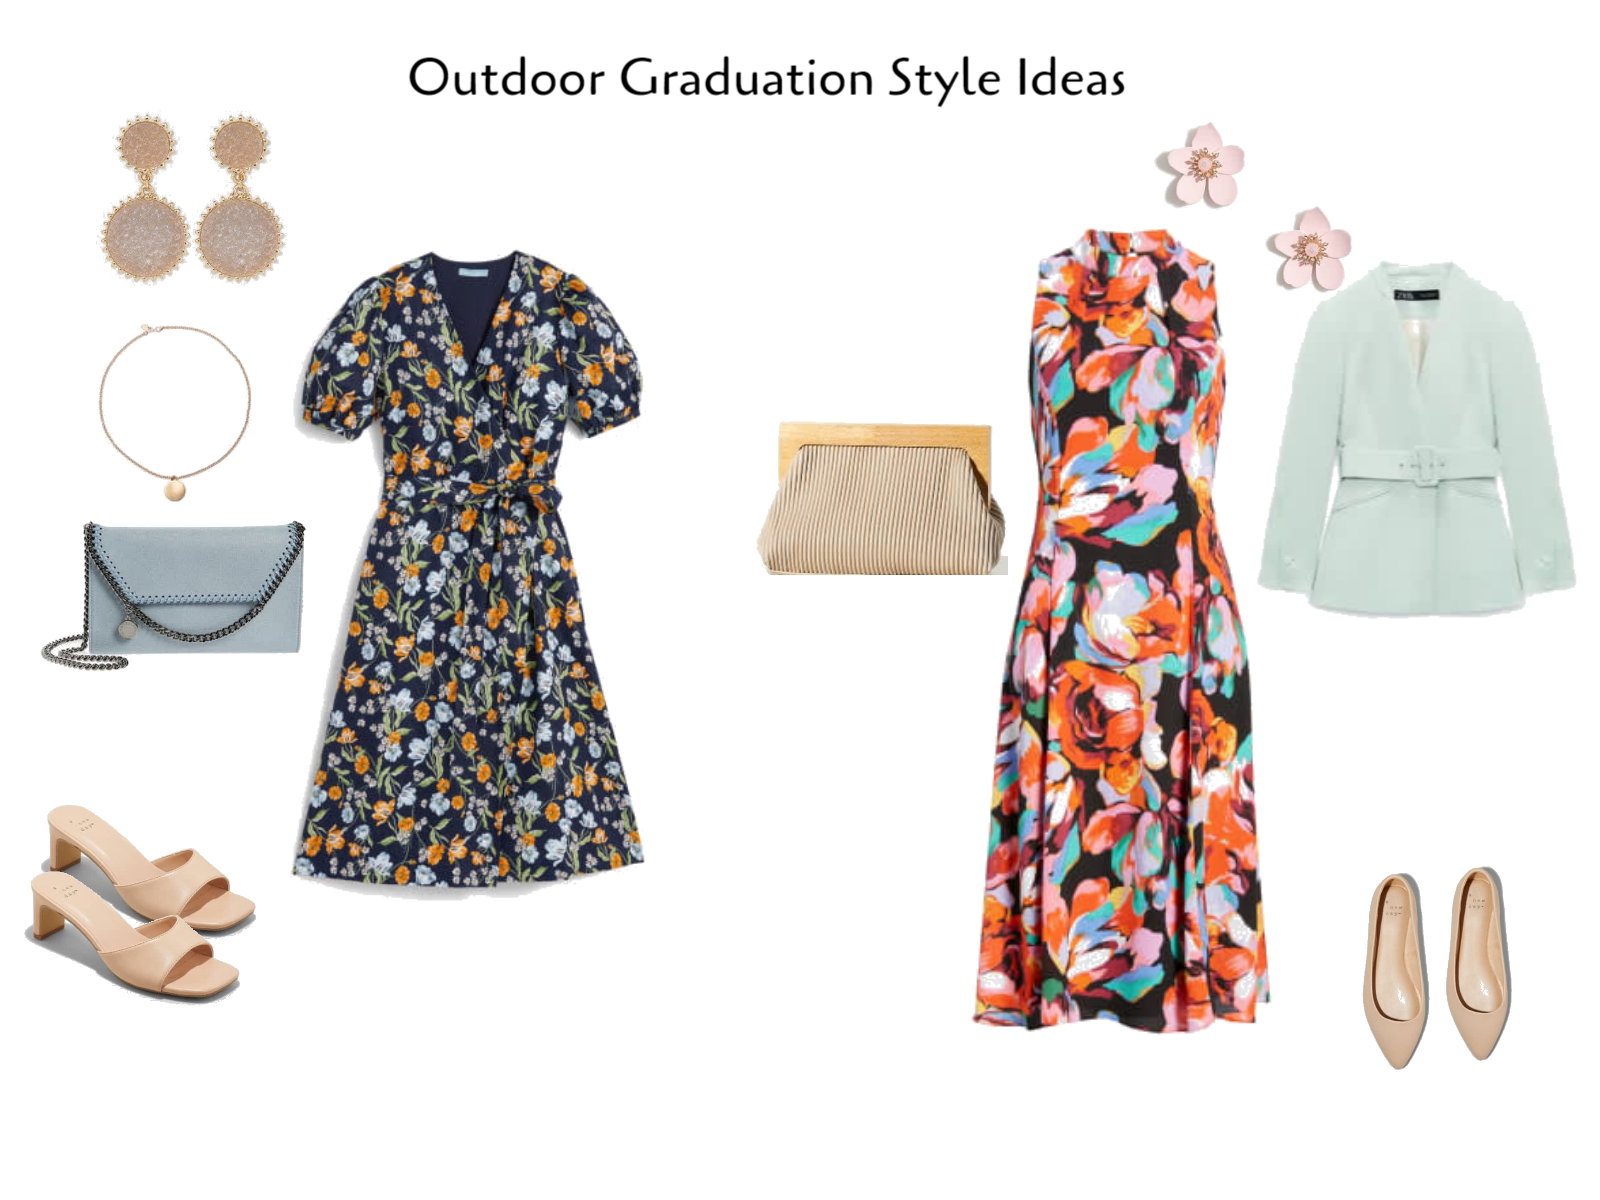 Dress appropriately for outdoor ceremonies with a sleeveless dress or light, floral dress.